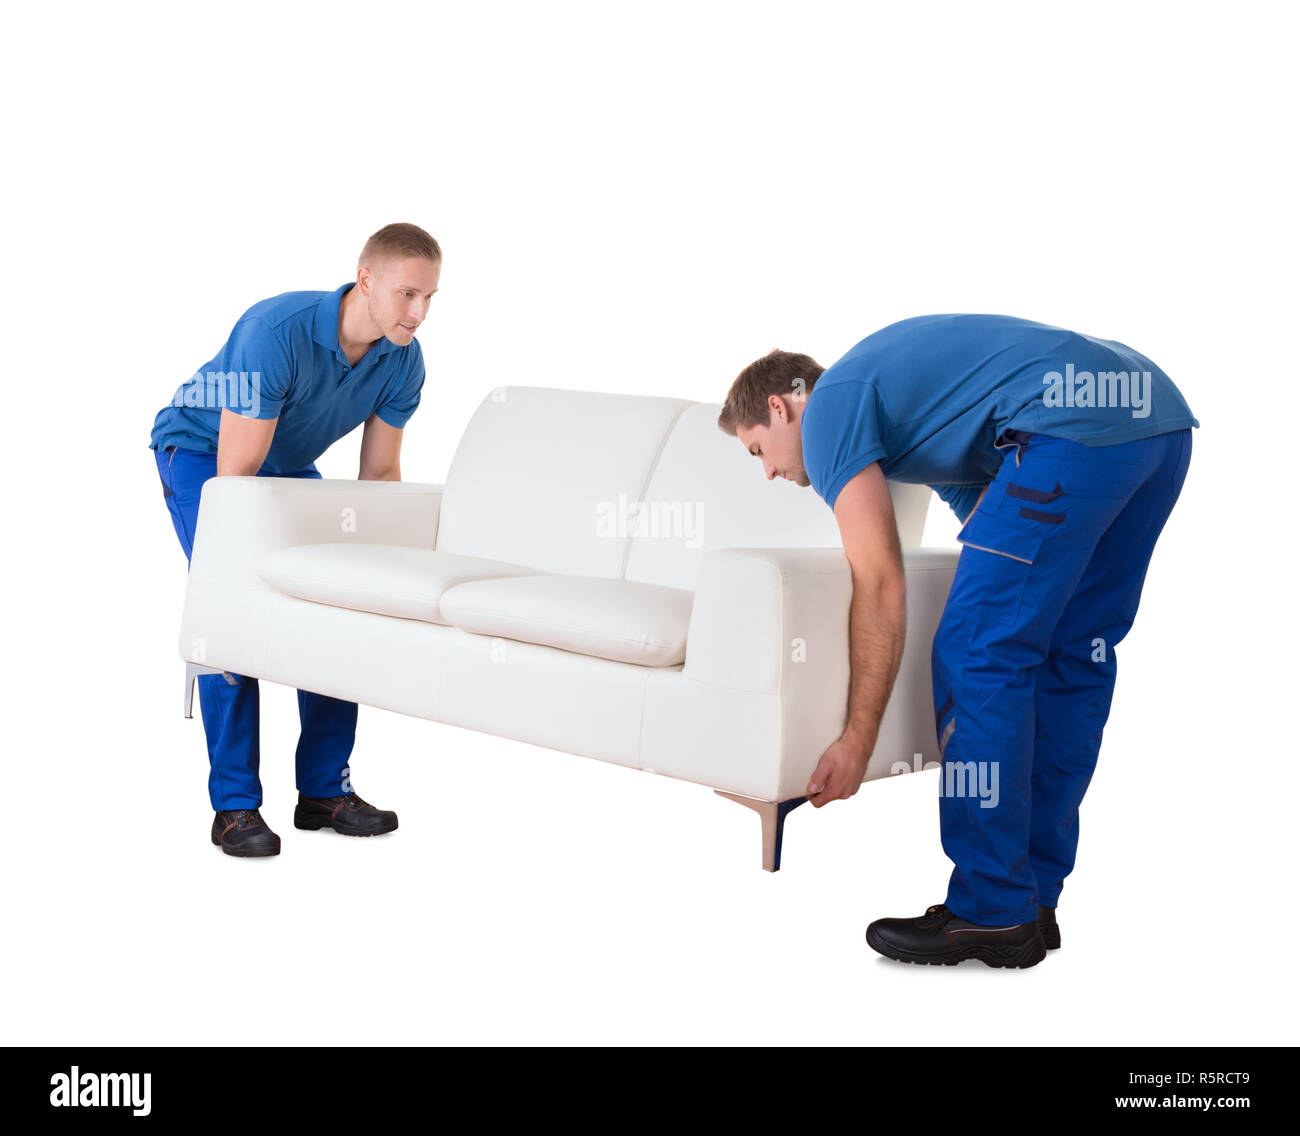 Two men moving furniture apartment Cut Out Stock Images & Pictures - Alamy